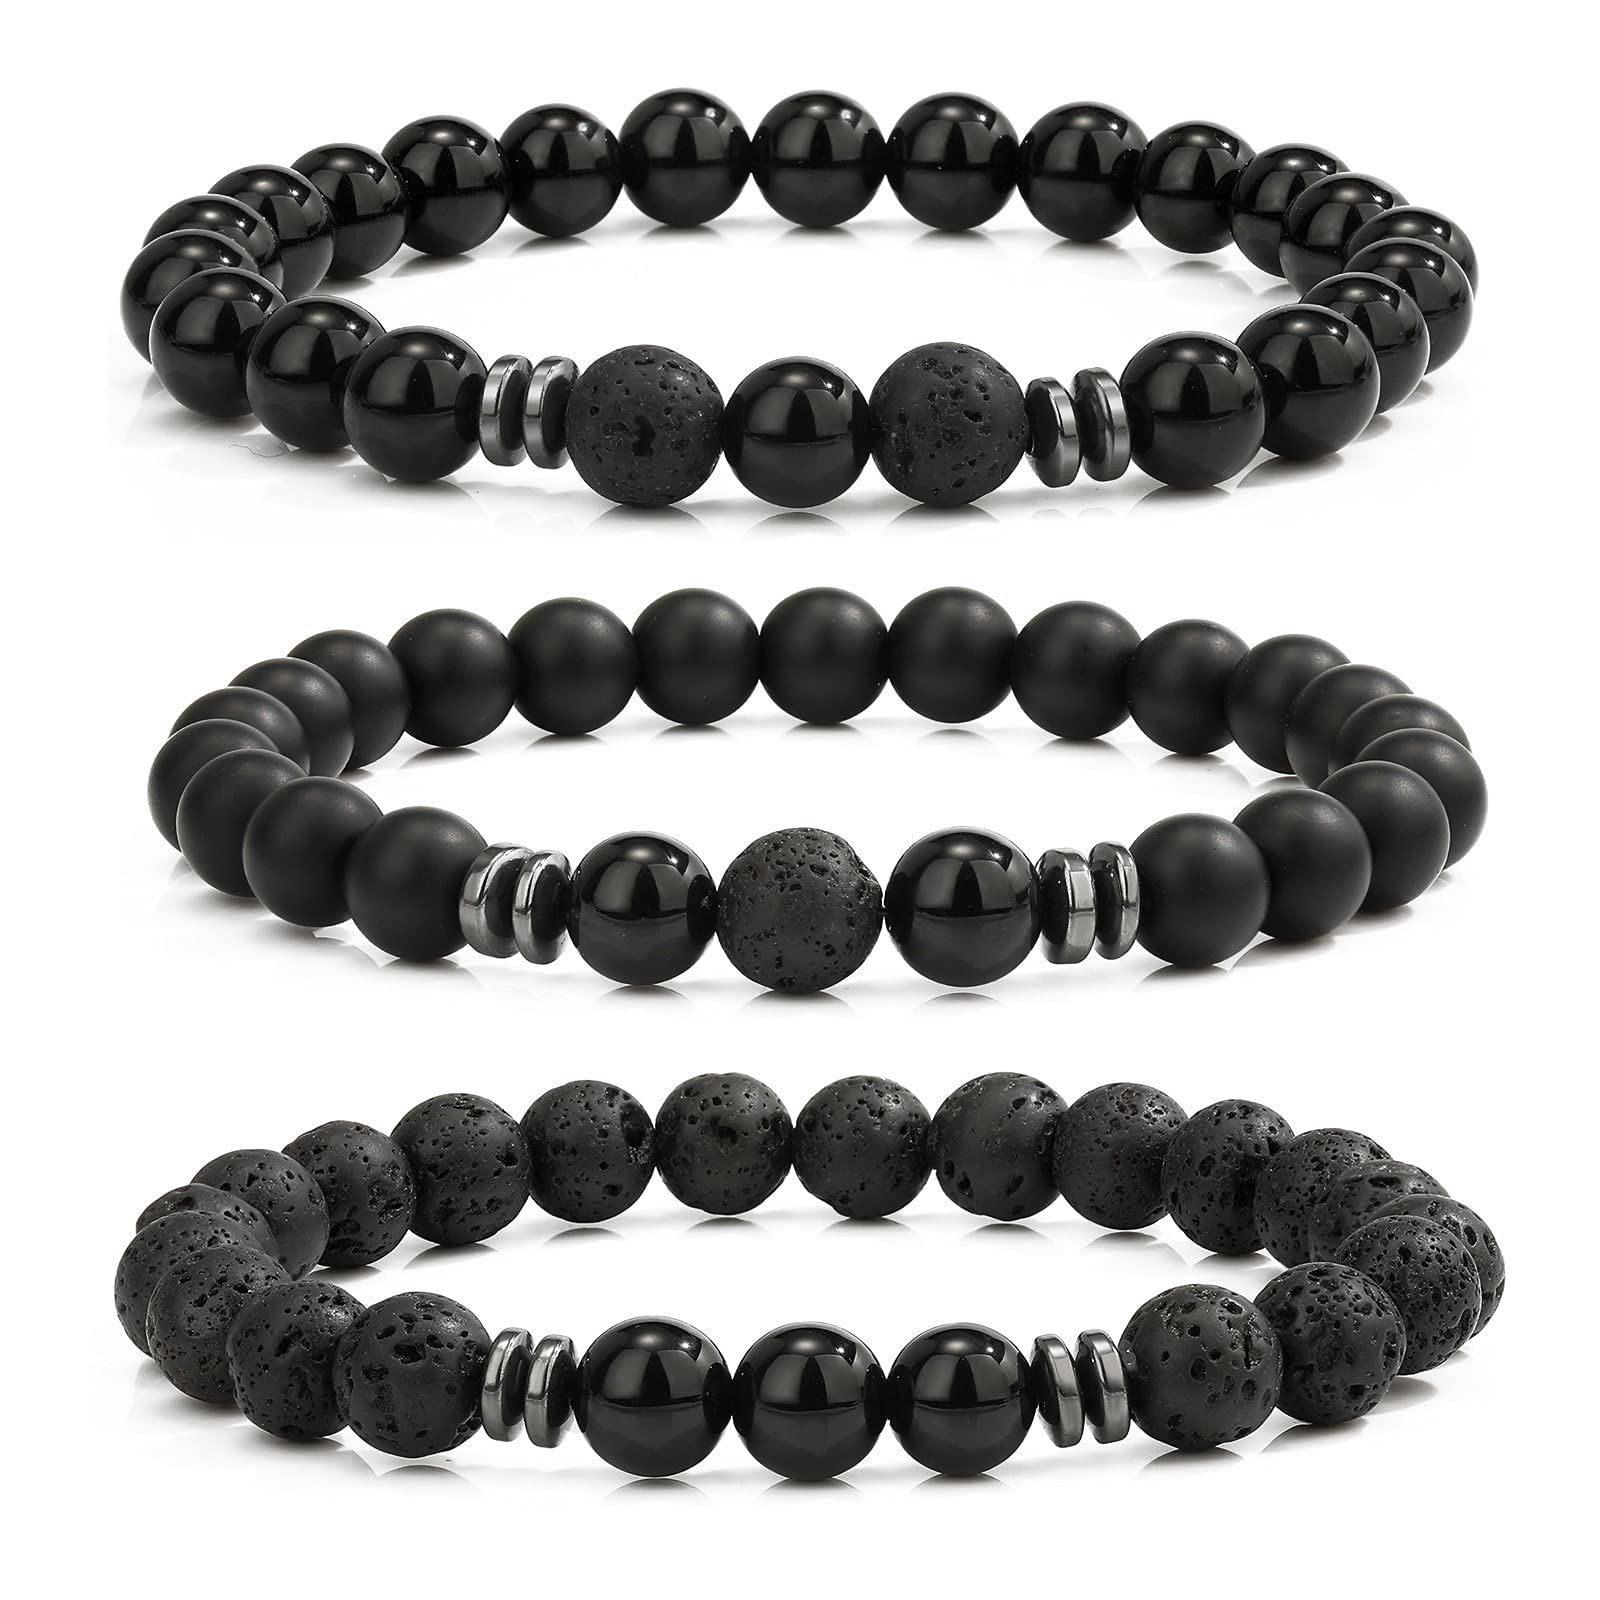 Mens beaded bracelets have gained popularity as stylish accessories that add a touch of personality and flair to any outfit.